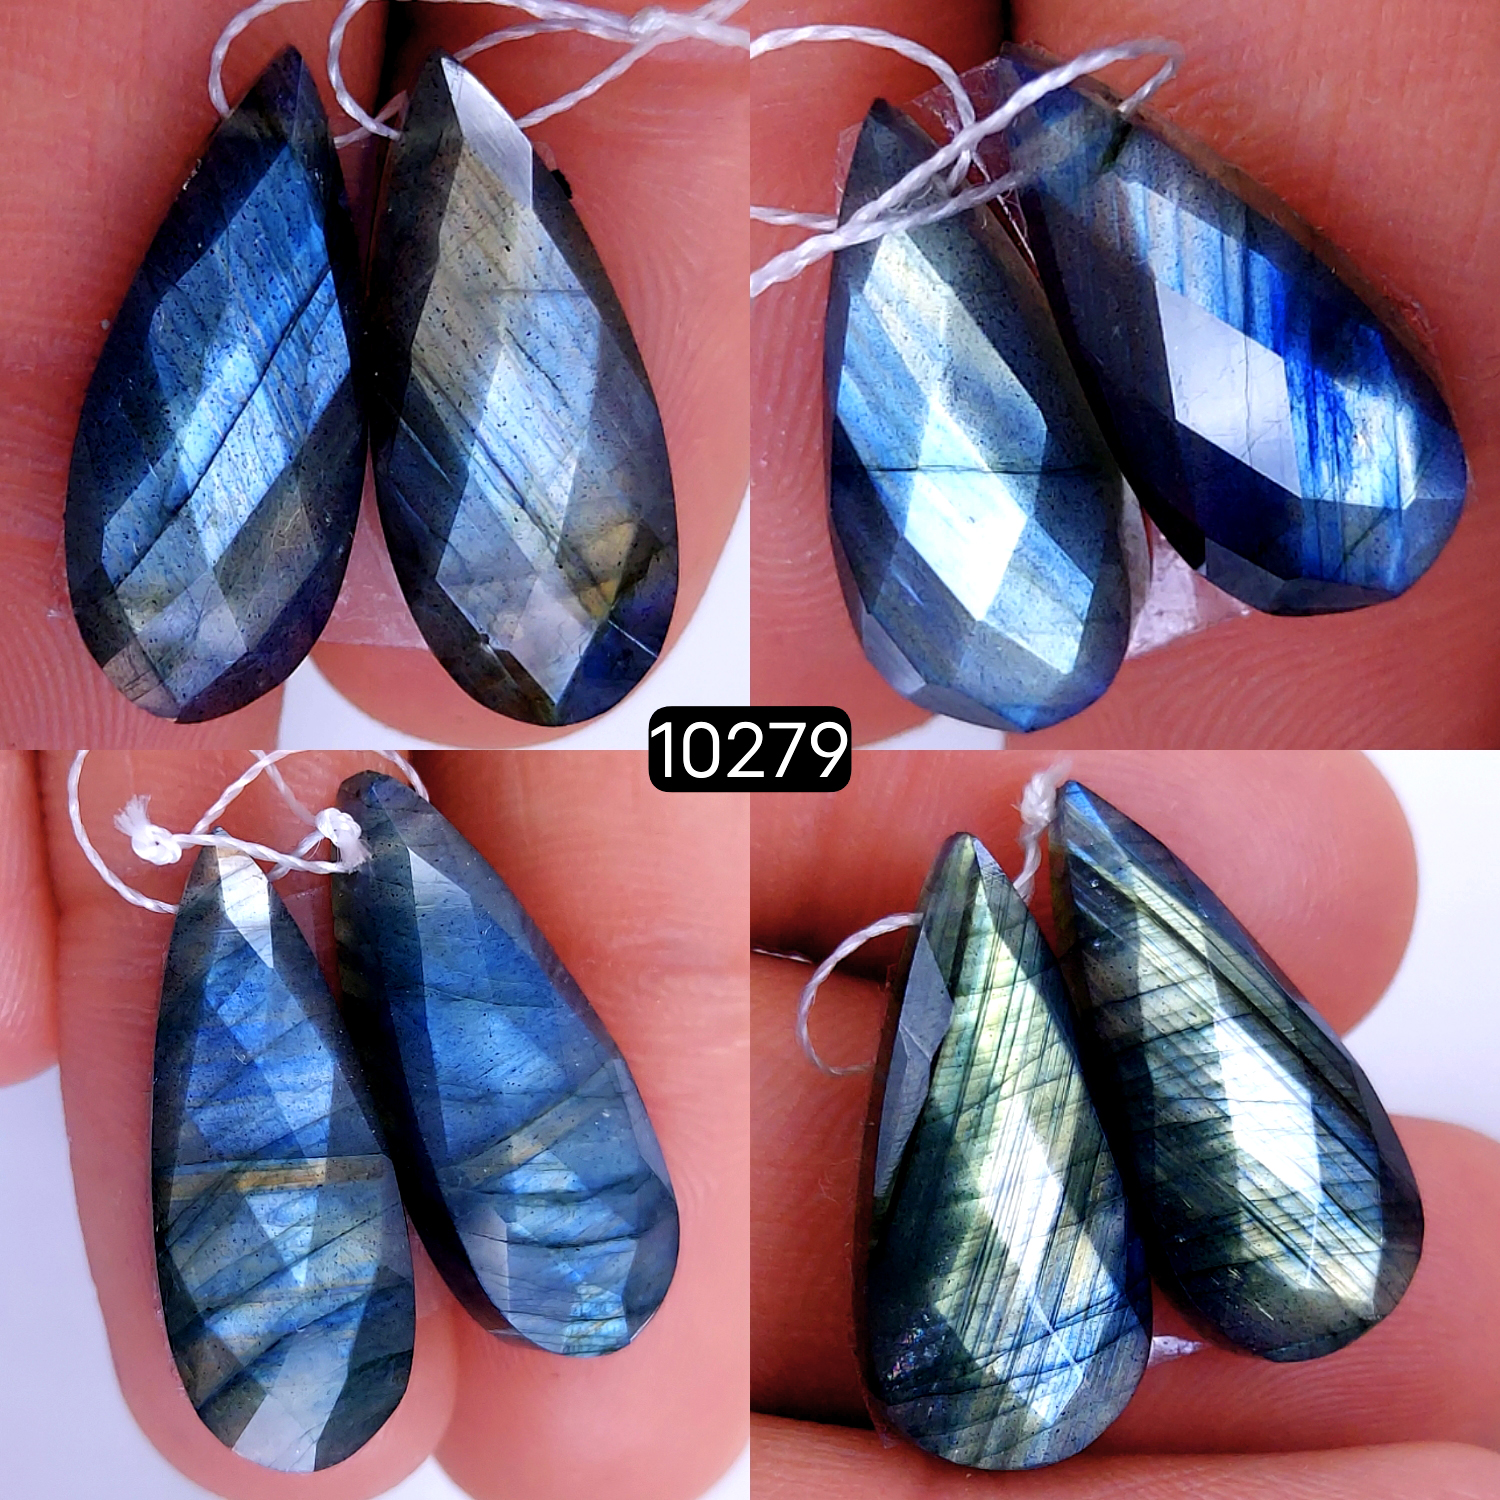 4Pair 78Cts Natural Labradorite Faceted Crystal Drill Dangle Drop Earring Pairs Silver Earrings Rose cut Labradorite Hoop Jewelry  25X10 18X9mm #10279